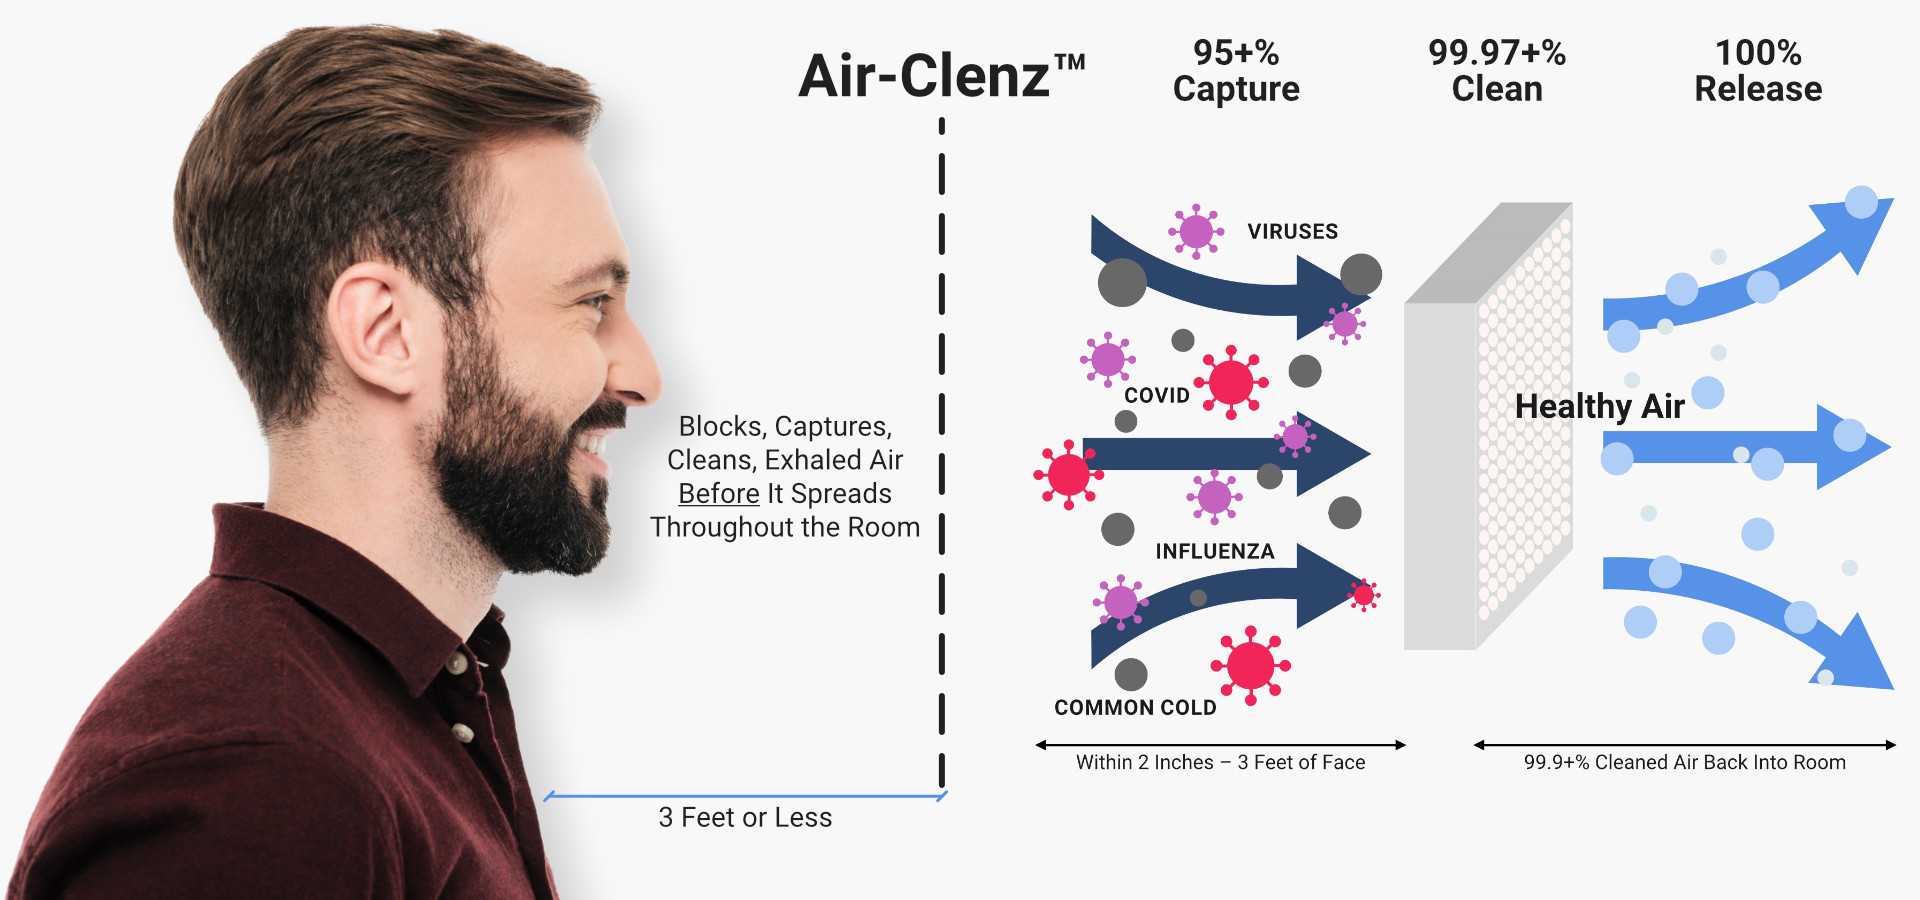 Air-Clenz Captures and Cleans